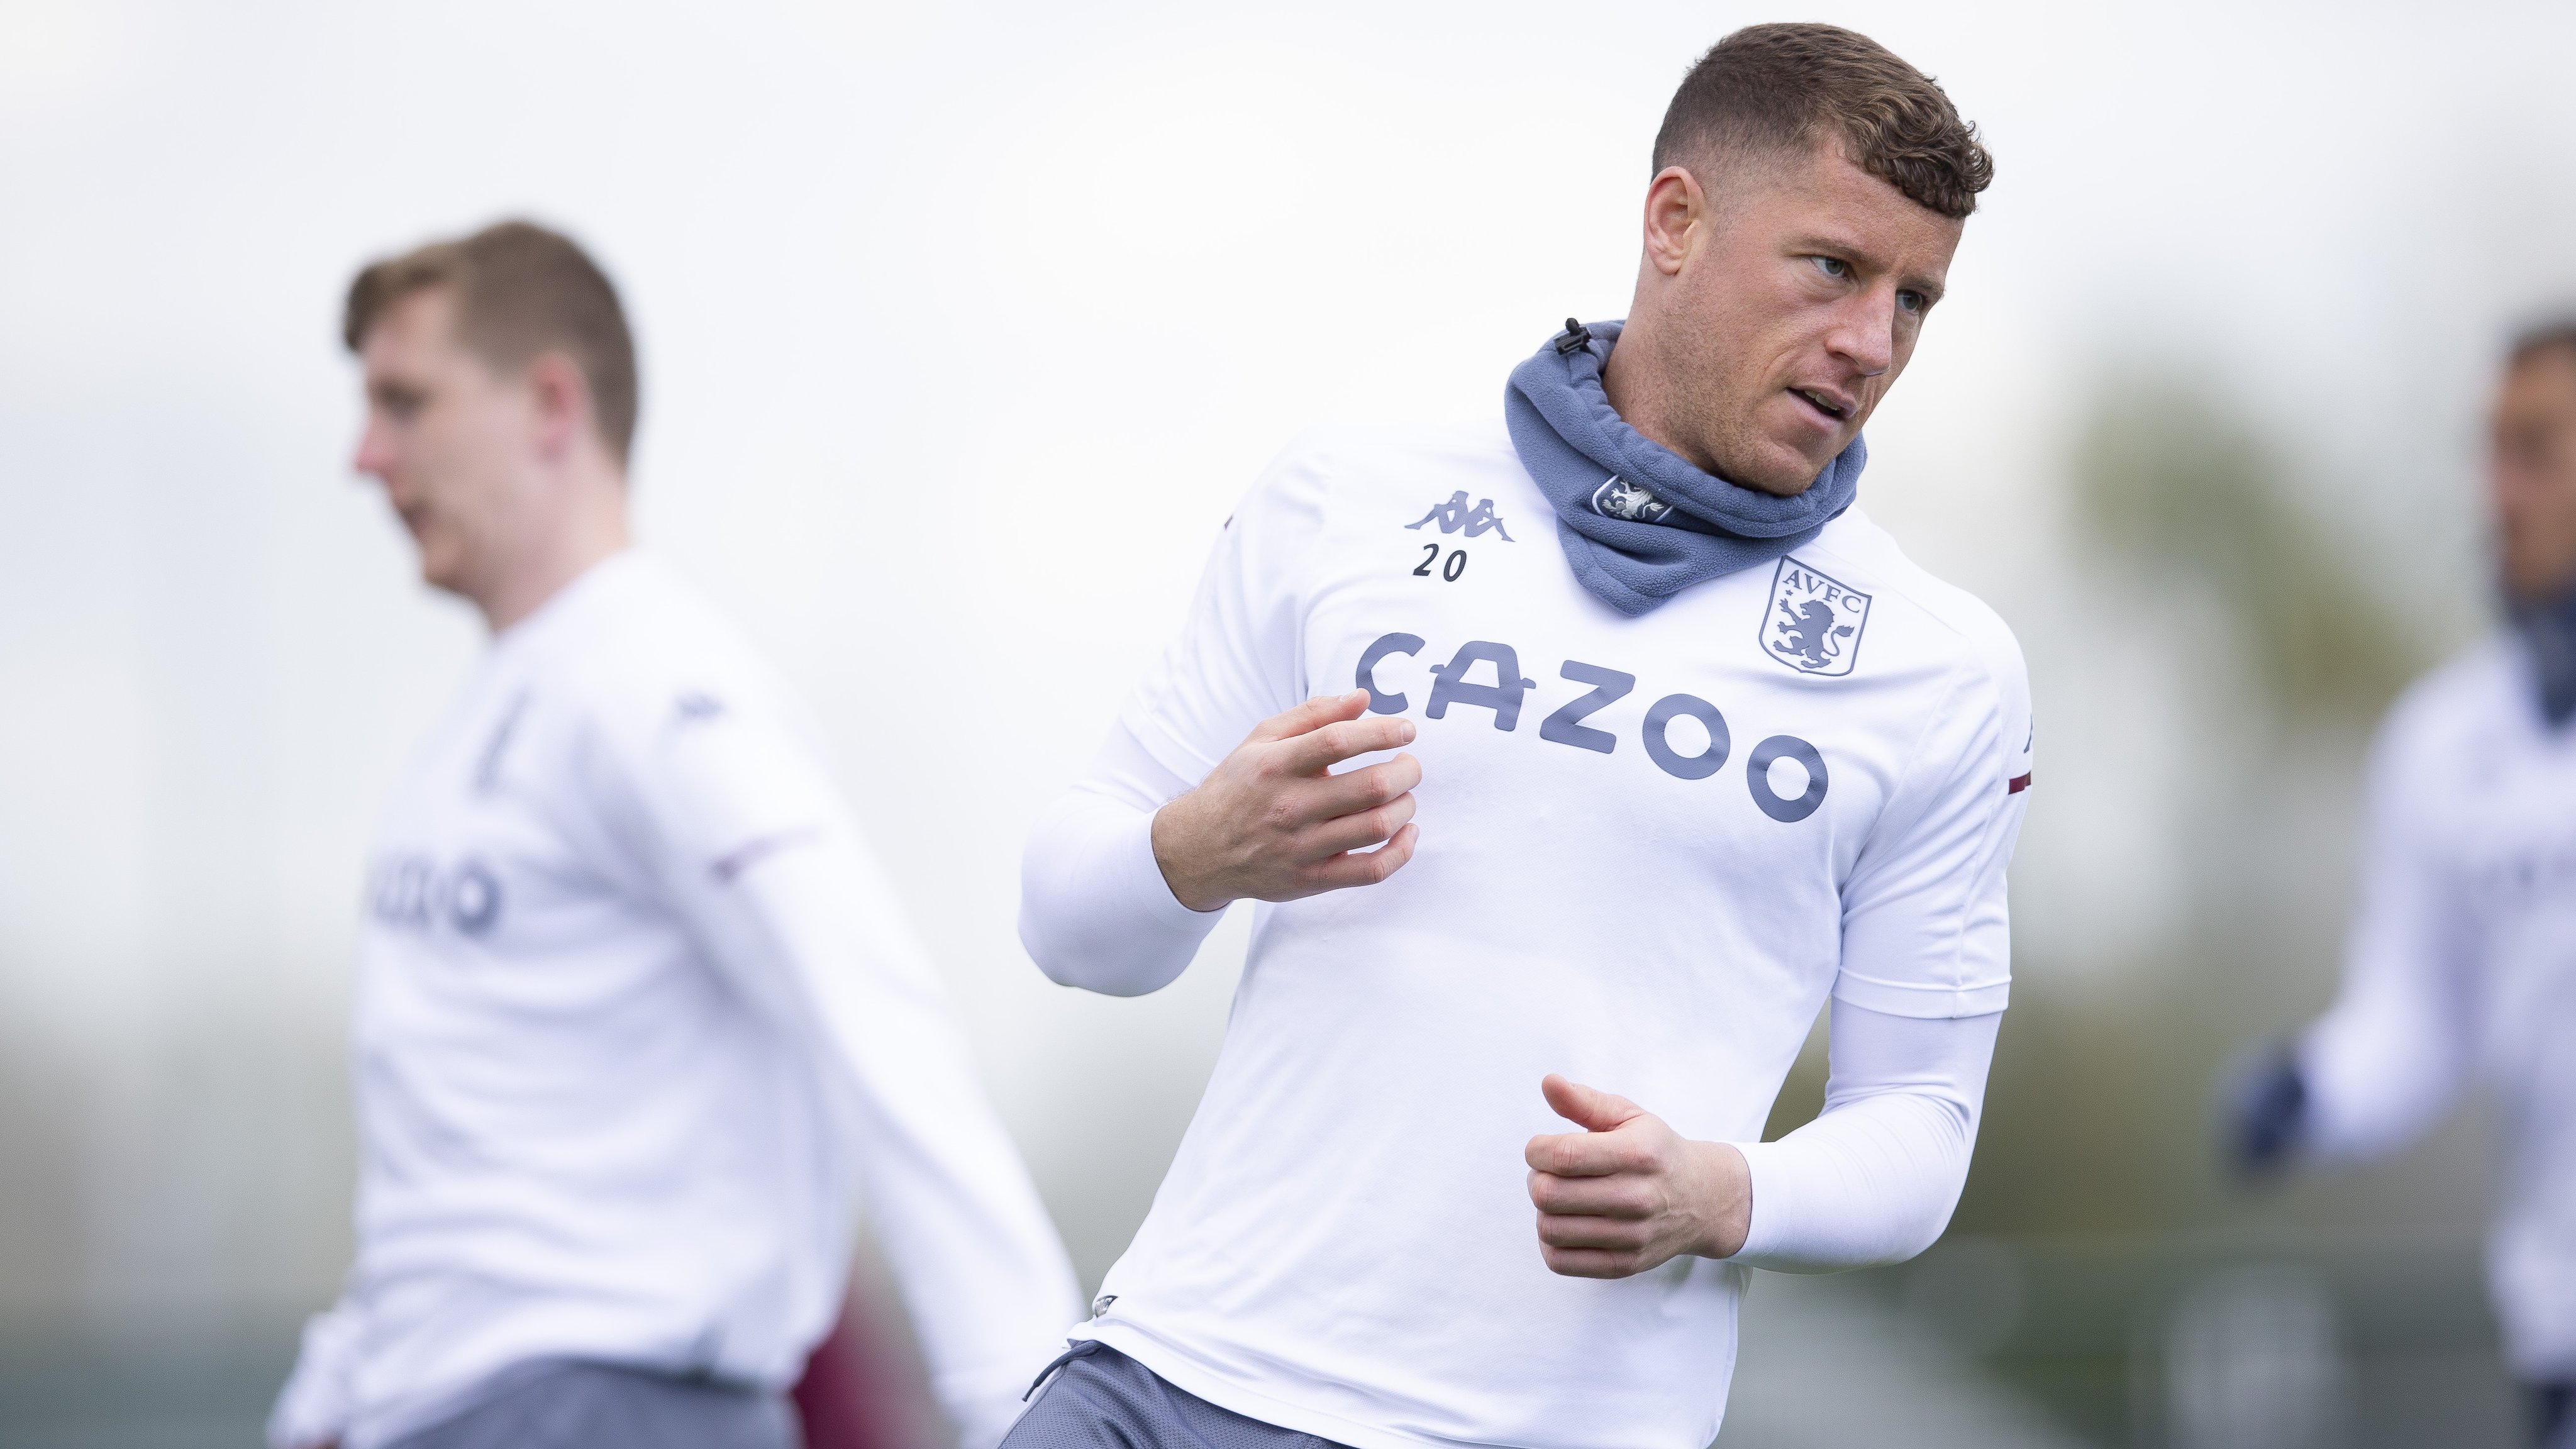 Ross Barkley’s future is at Chelsea with deal for only one-year loan, confirms Dean Smith